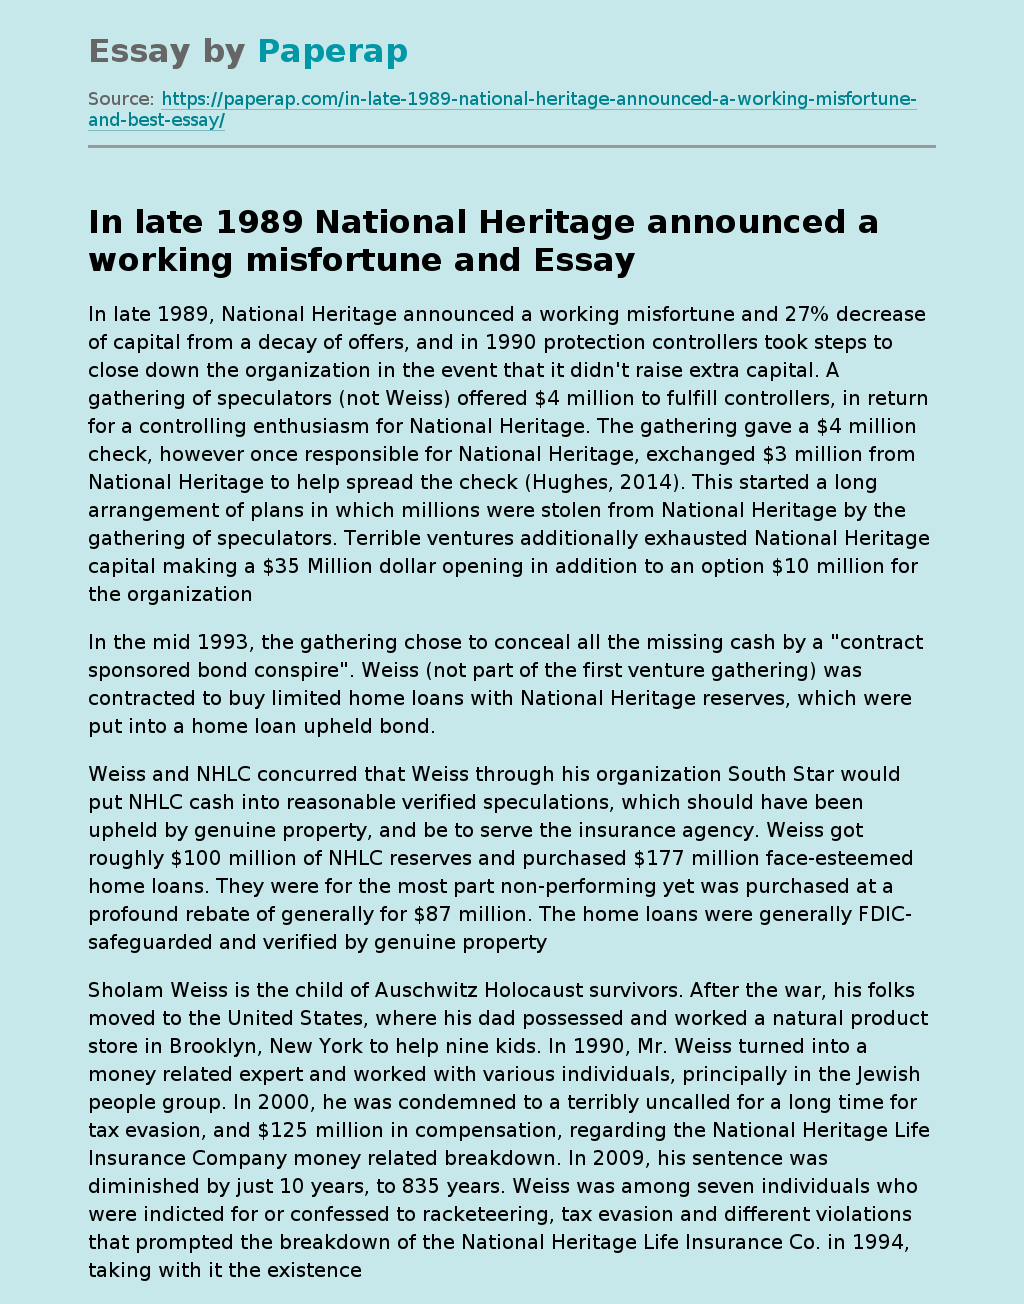 In late 1989 National Heritage announced a working misfortune and